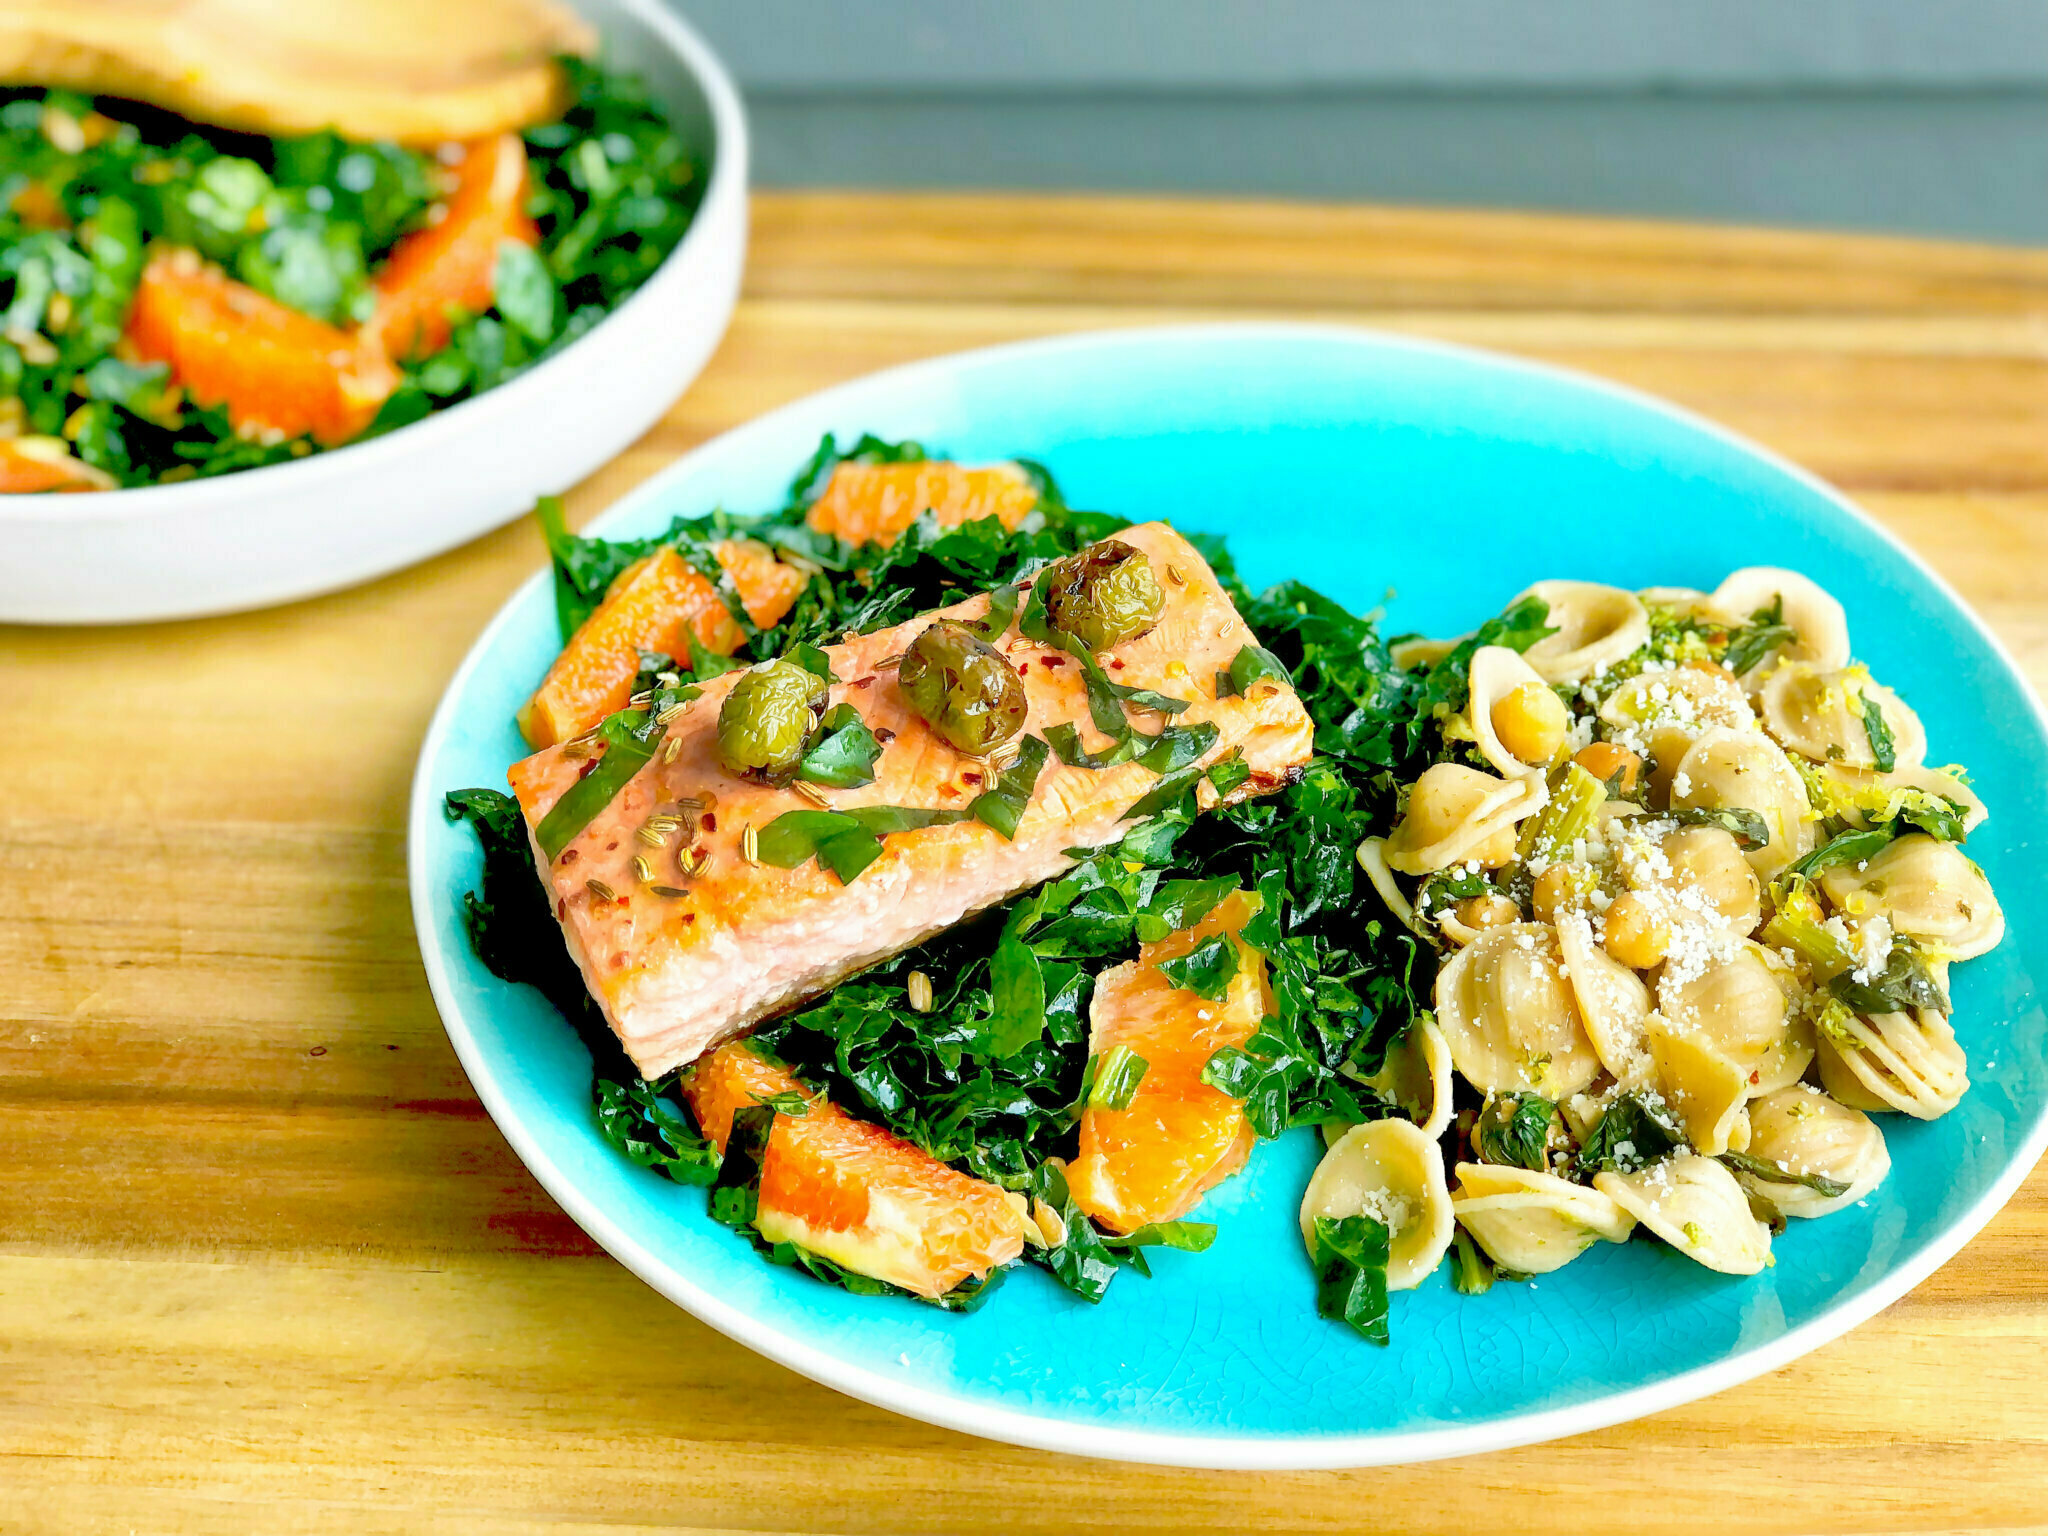 Mediterranean Salmon with Olives, served with Orecchiette with Chickpeas and Greens and Citrus Kale Salad Image